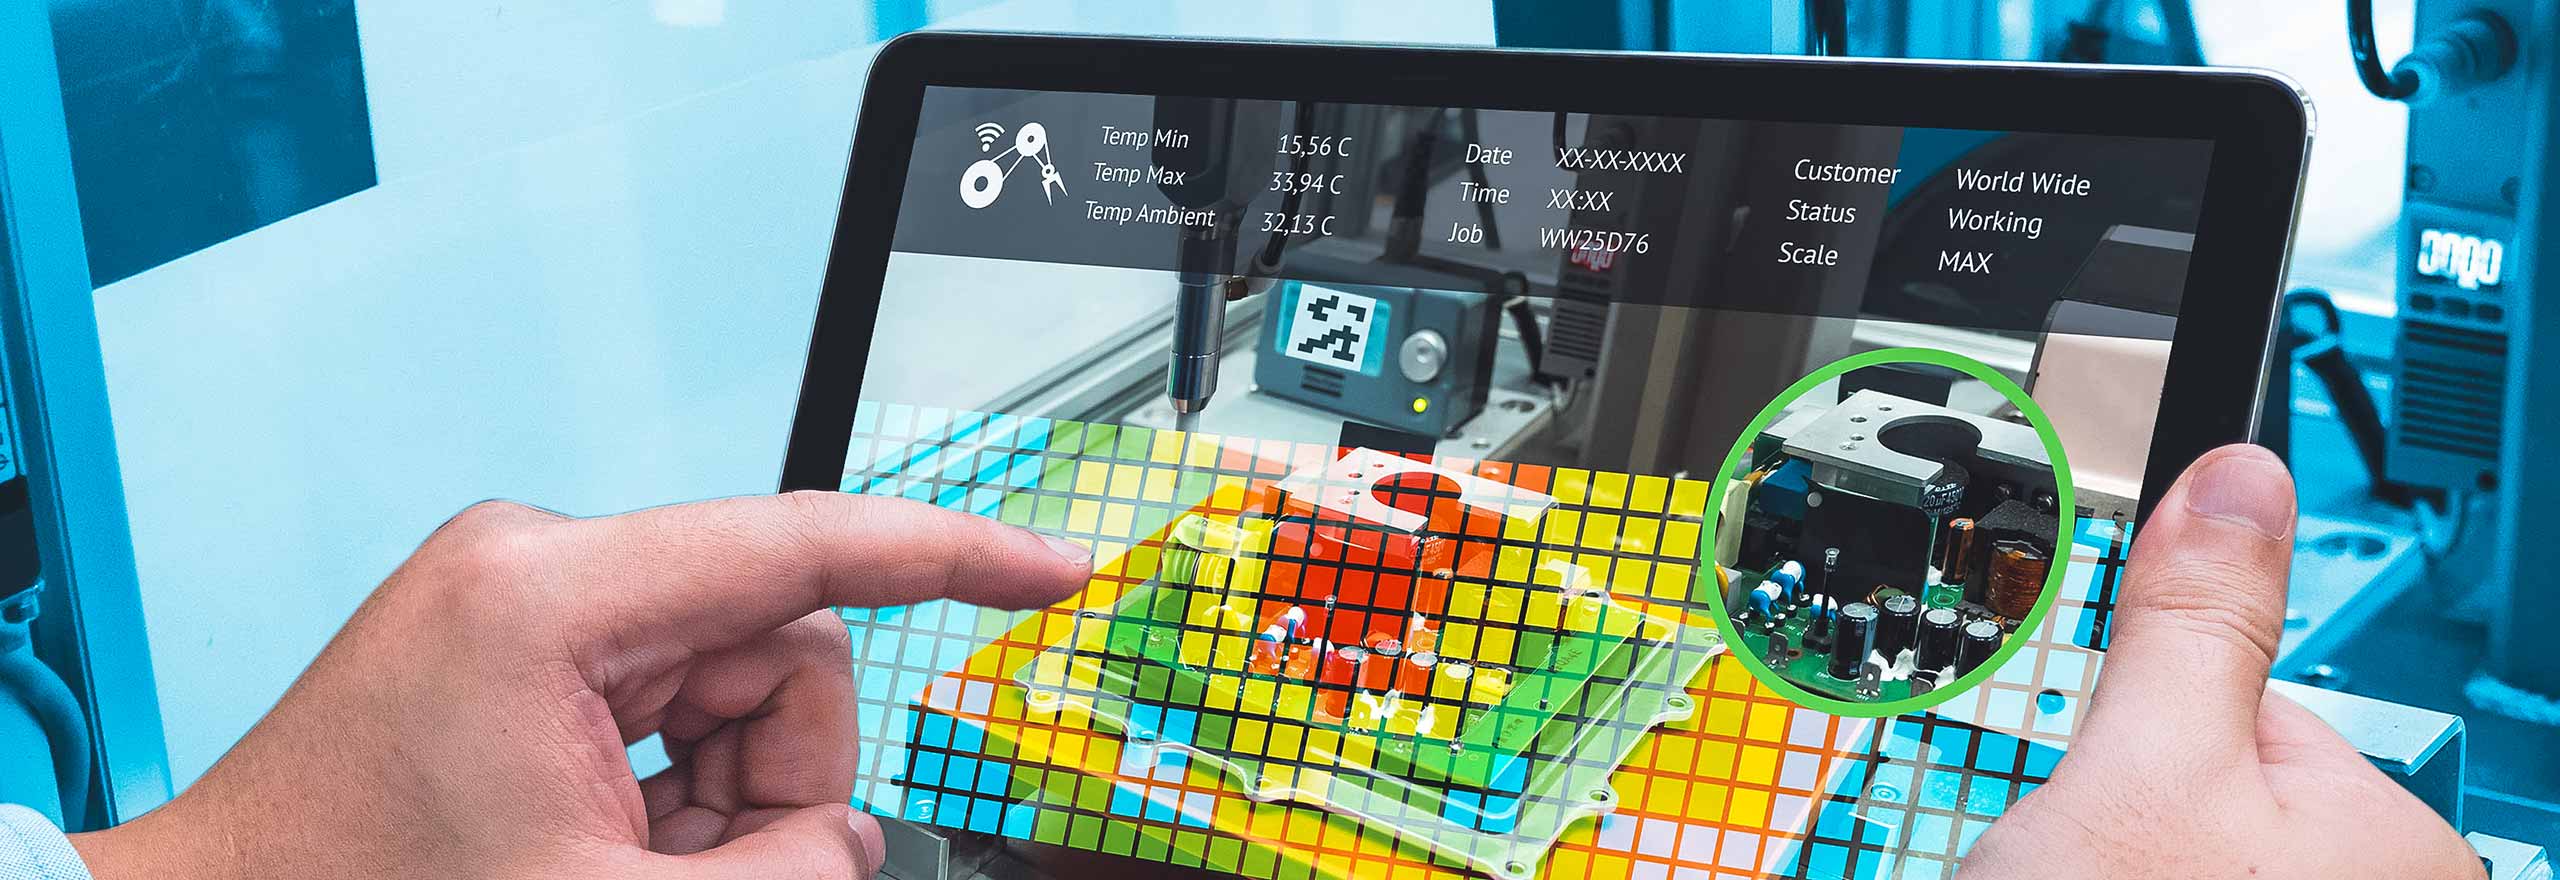 Image depicting manufacturing plant personnel with augmented realty image on a tablet